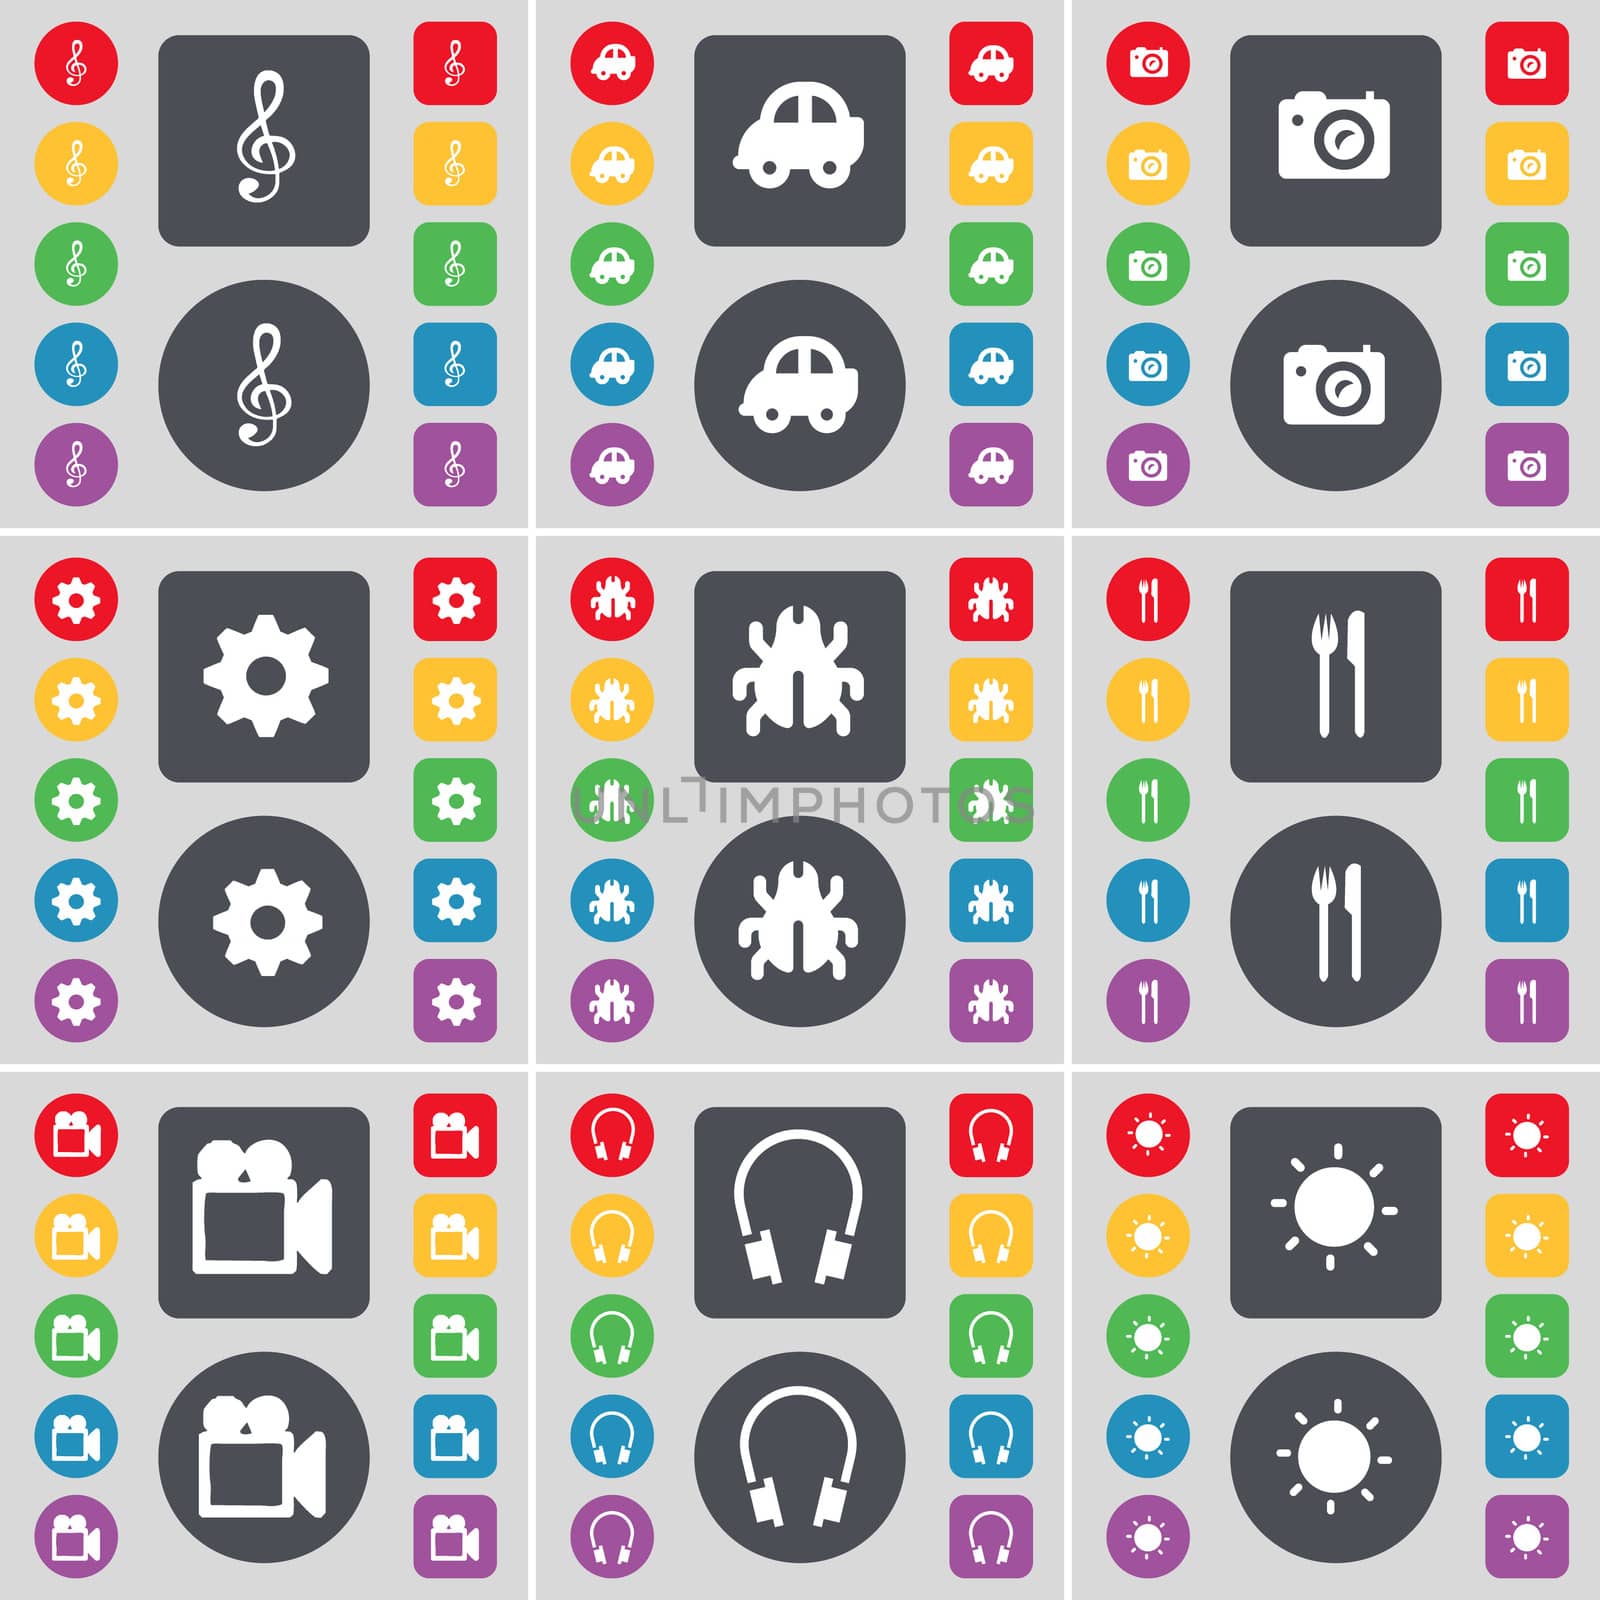 Clef, Car, Camera, Gear, Bug, Fork and knife, Film camera, Headphone, Light icon symbol. A large set of flat, colored buttons for your design. illustration